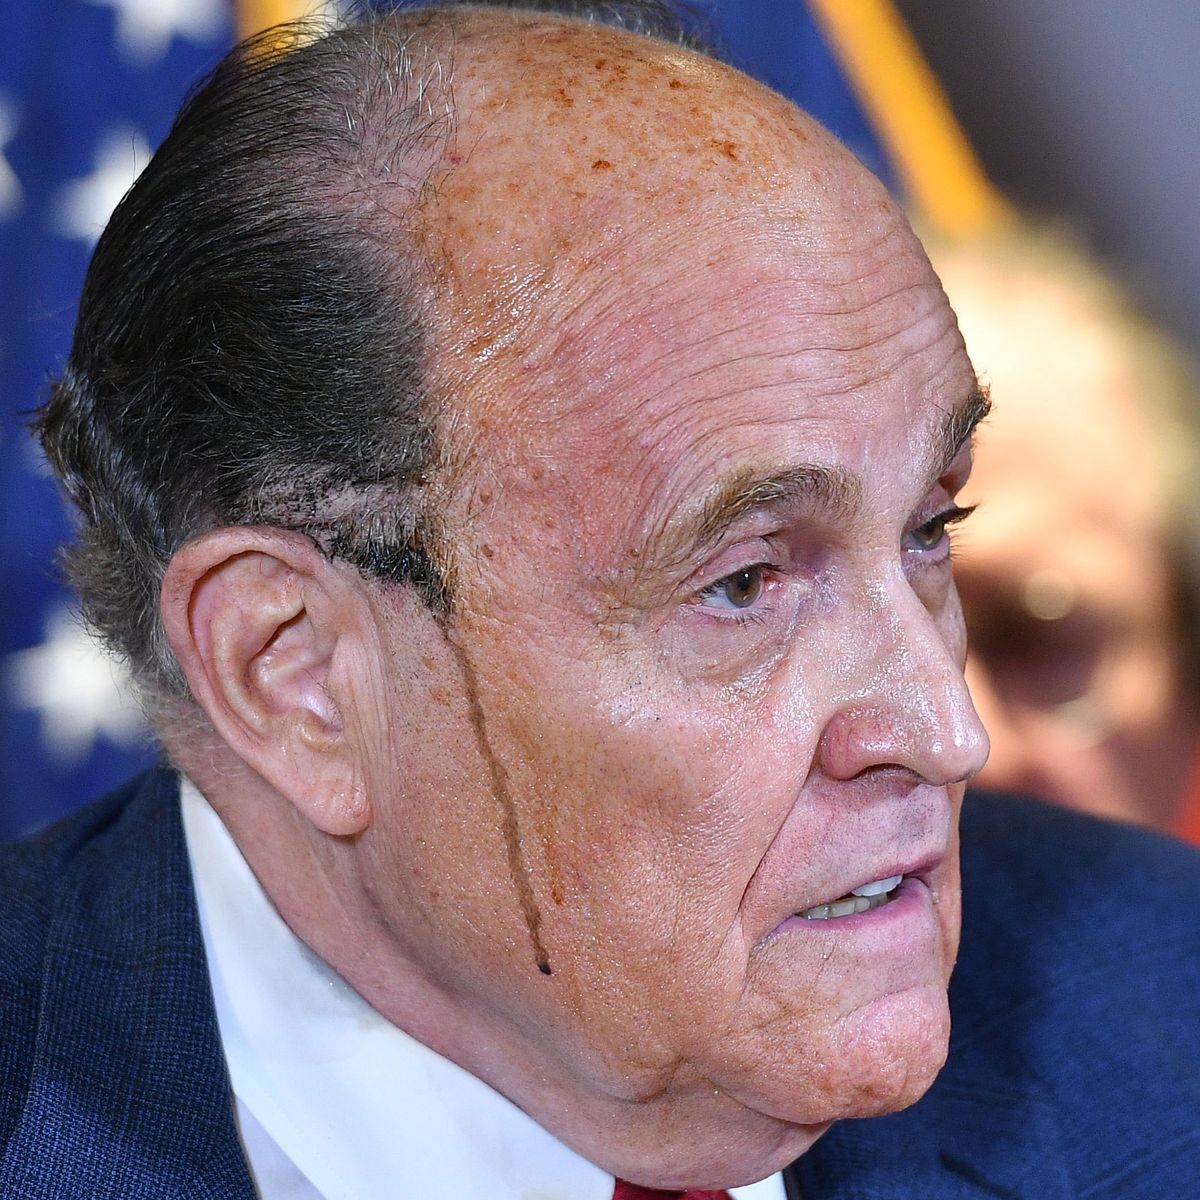 Trump Lawyer Rudy Giuliani Melts Down In Press Conference